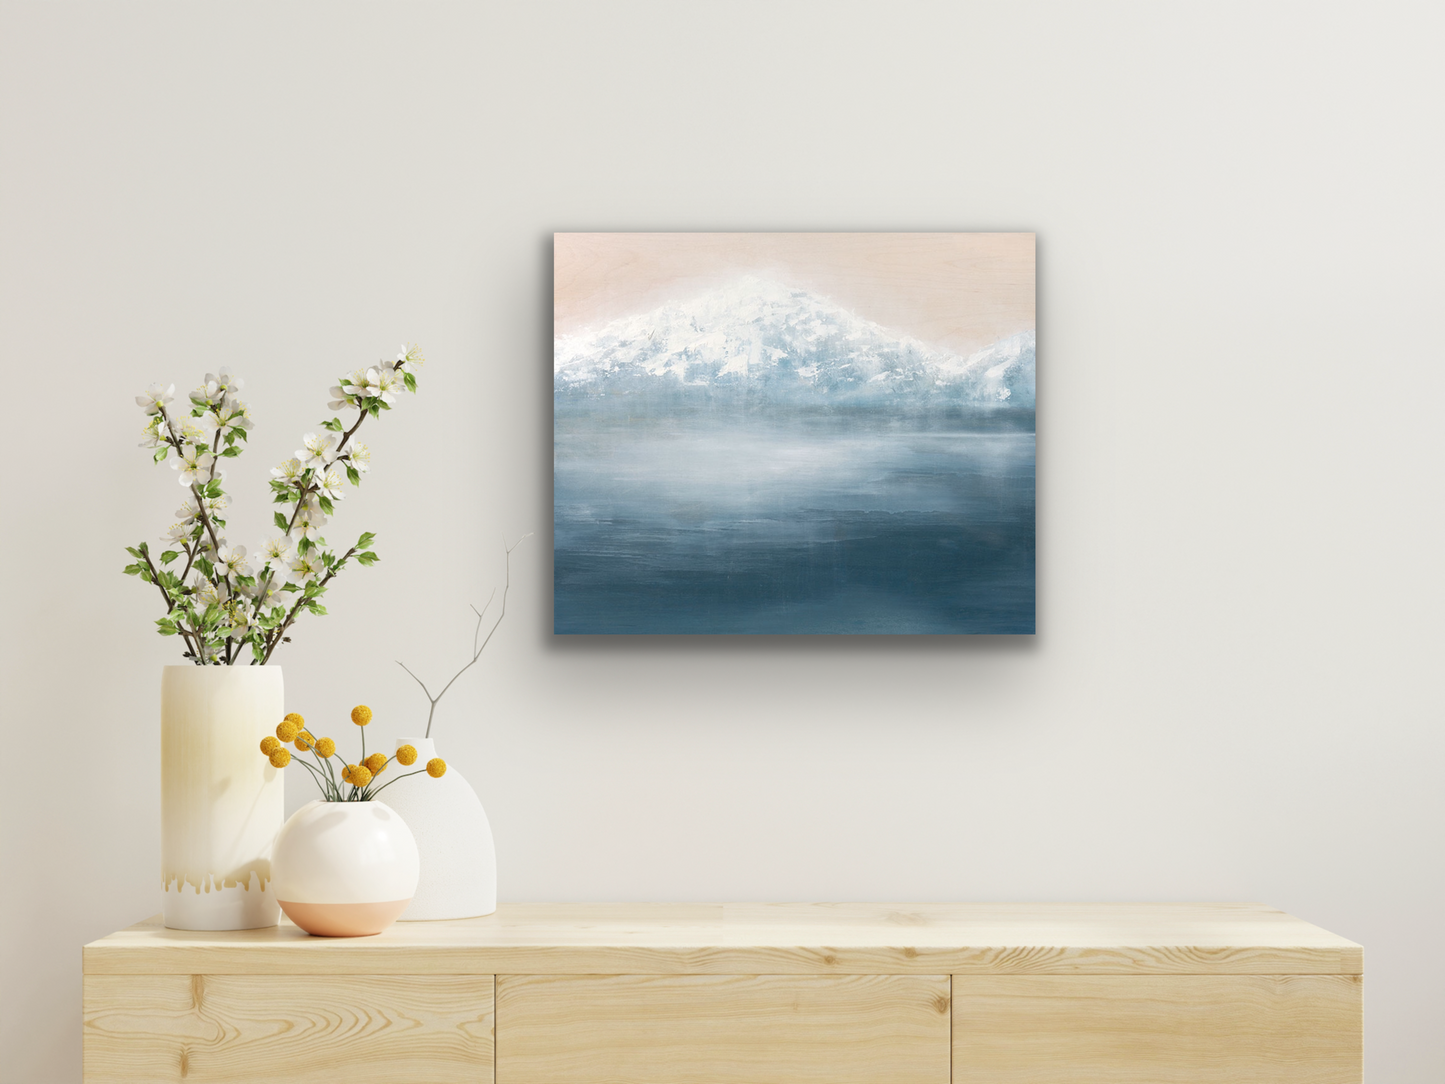 "Light V" work of art will look great in your hallway or bedroom with its soothing colours and composition.